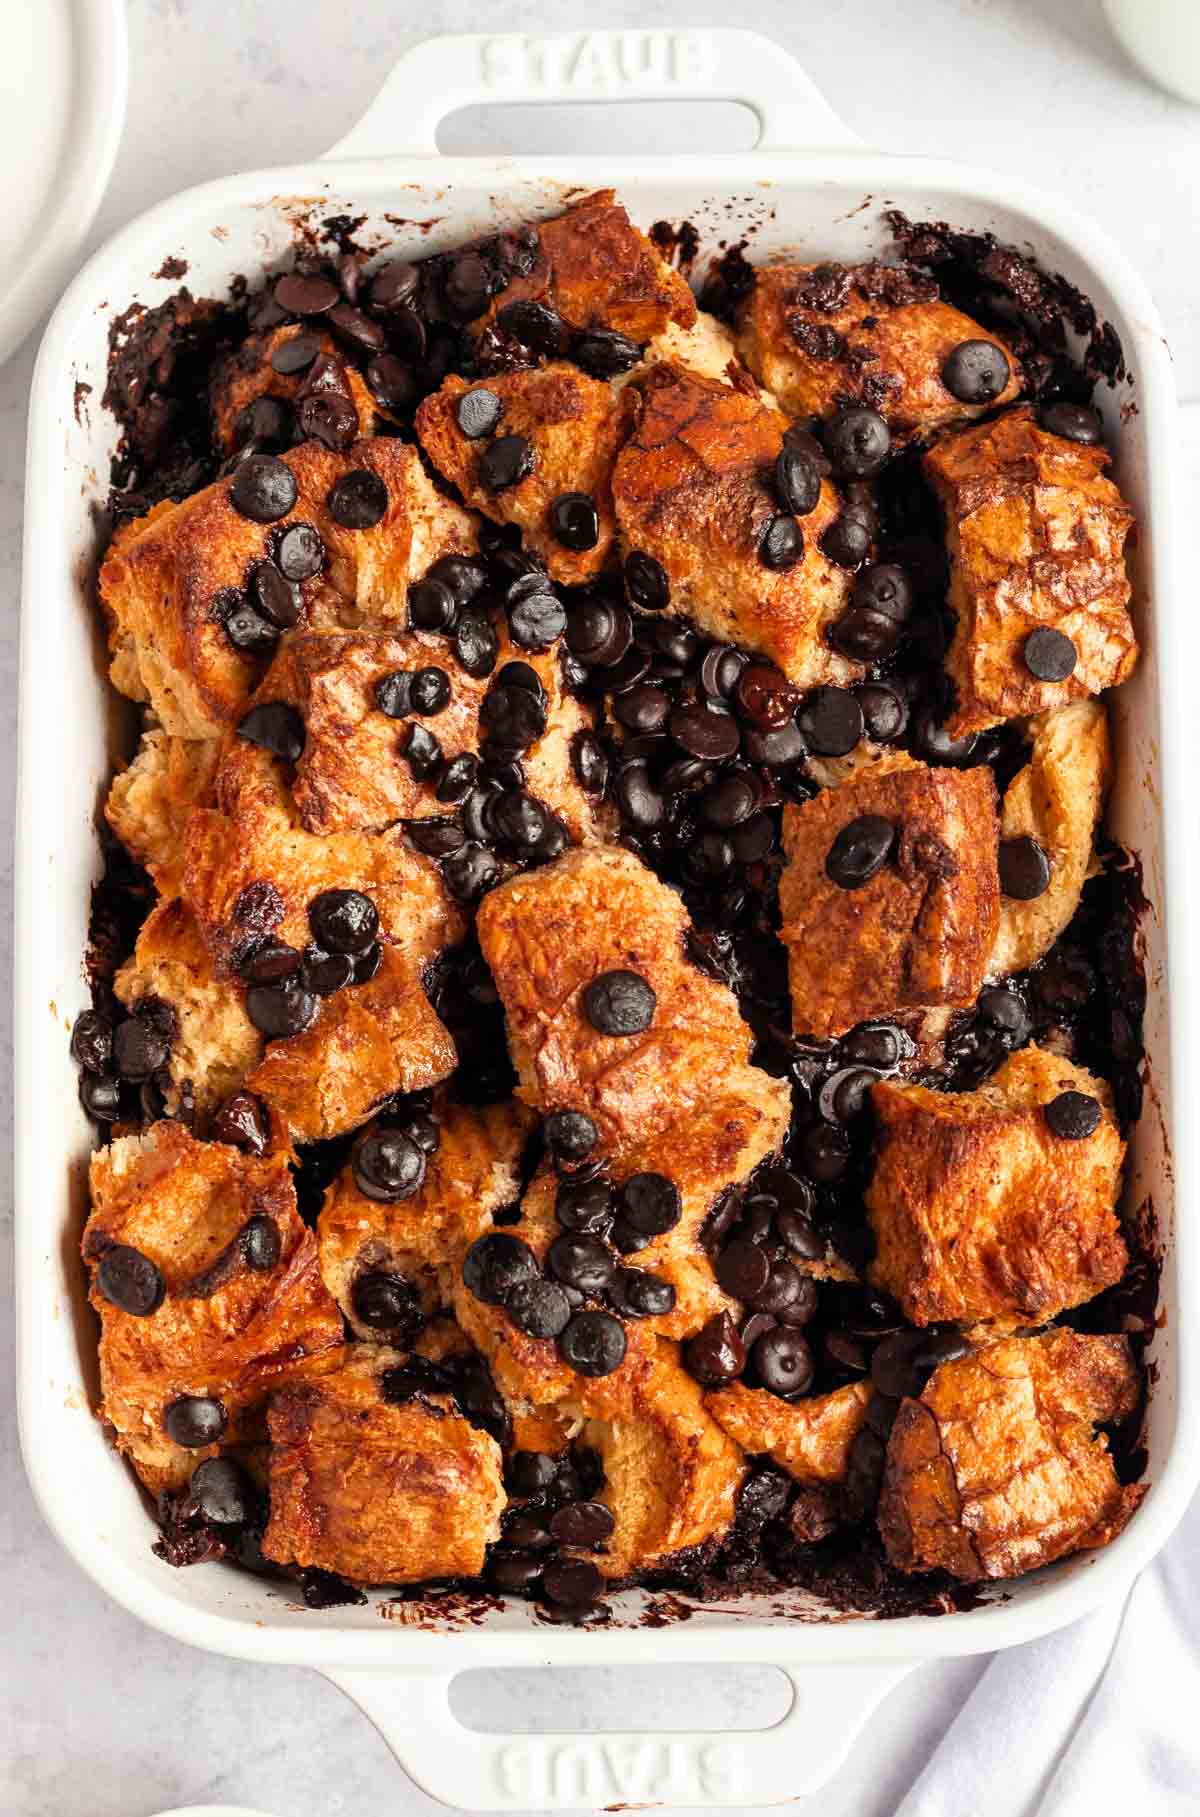 Overhead shot of bread pudding with chocolate chips.